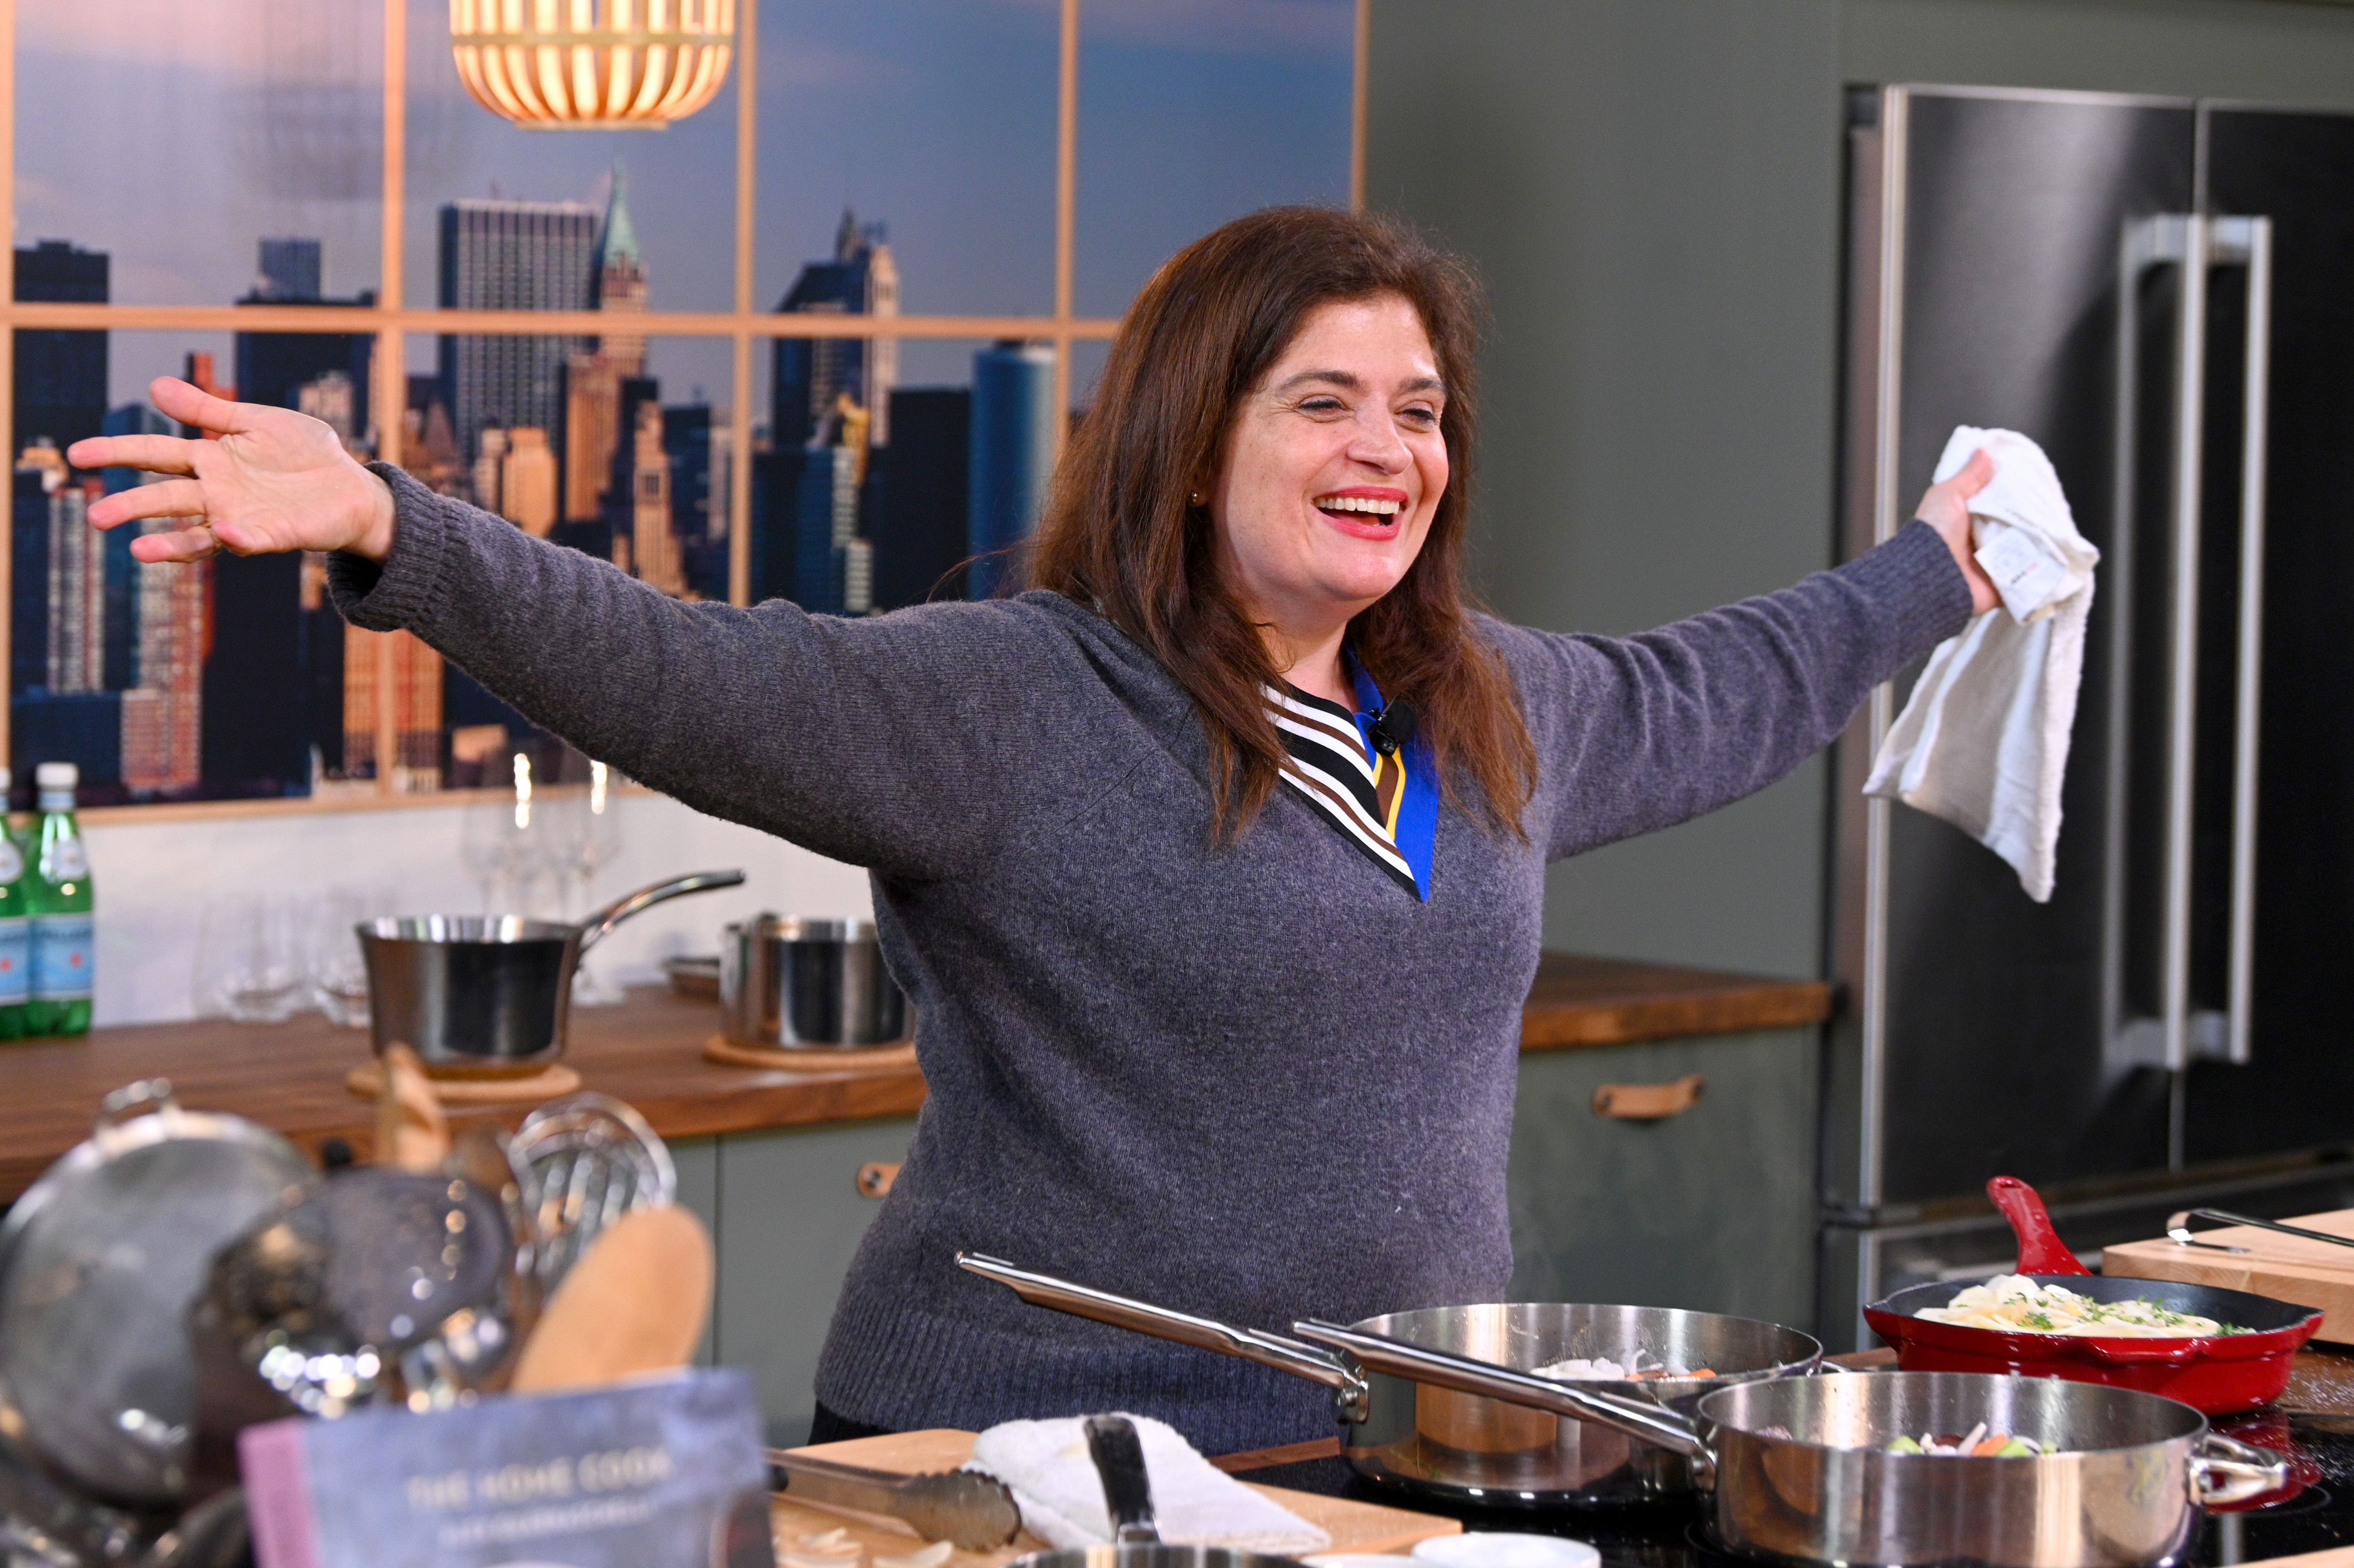 Food Network star Alex Guarnaschelli stretches her arms out during a meal demonstration.